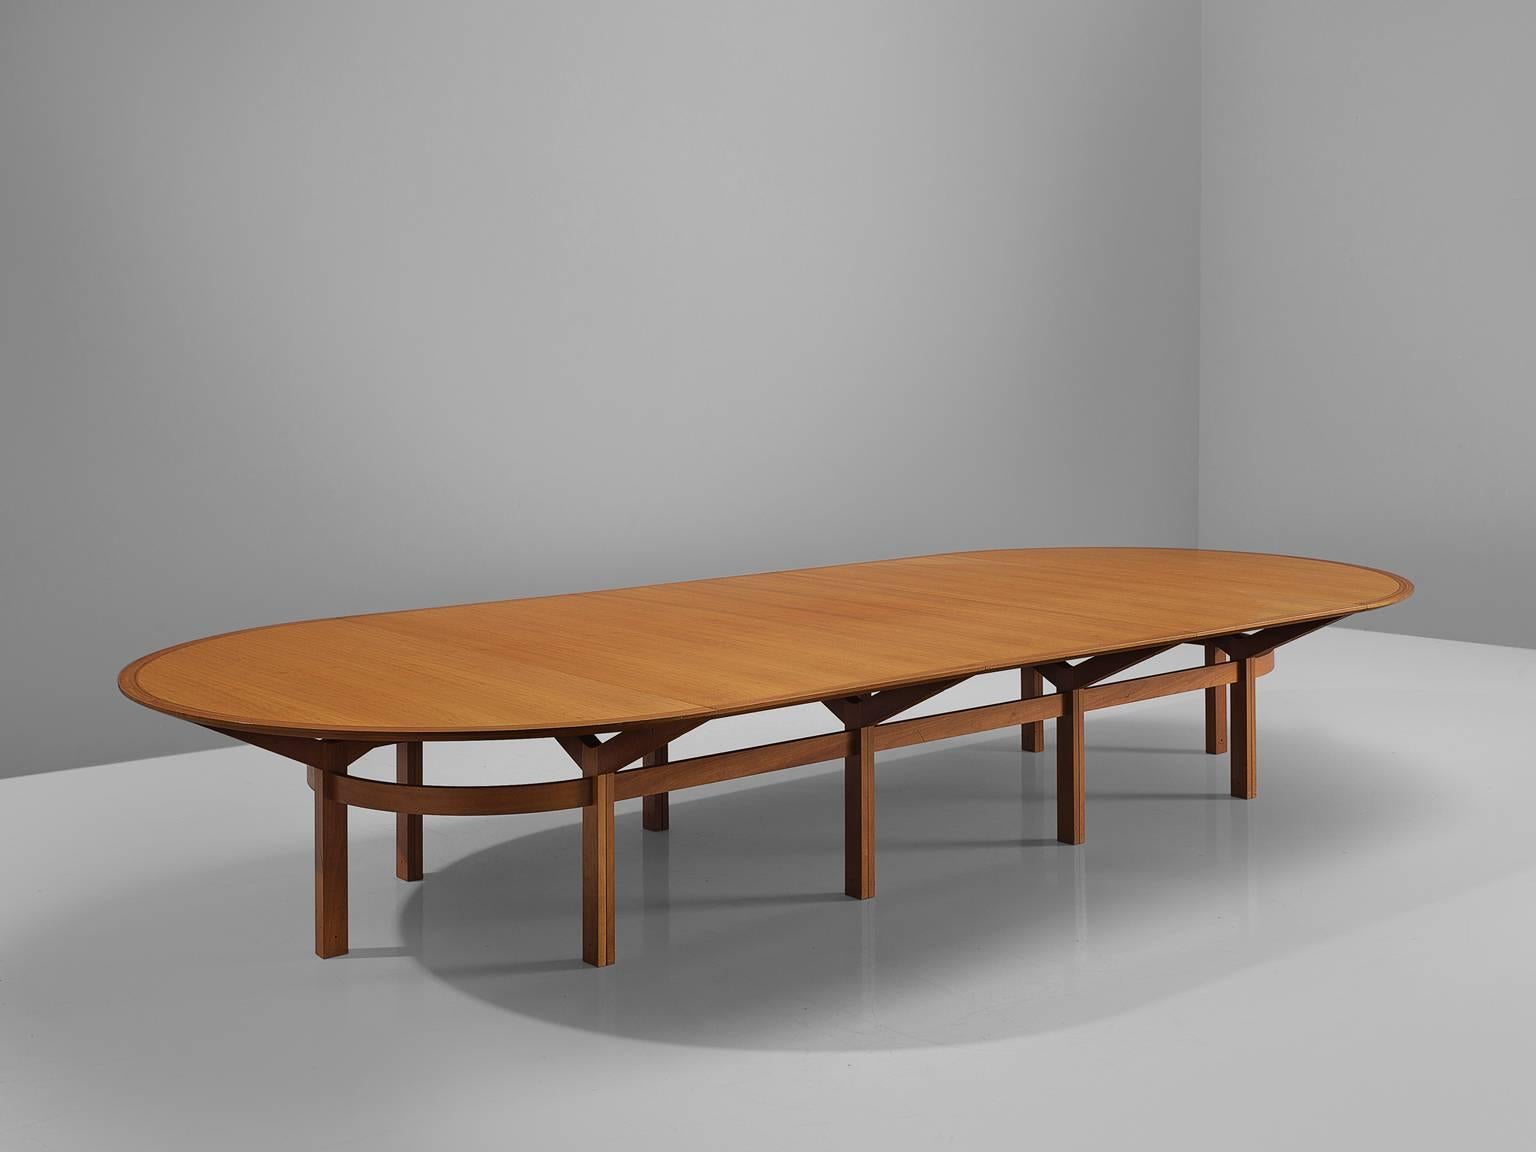 Rud Thygesen and Johnny Sørensen, conference table, teak, Denmark, circa 1950. Measure: 4.7mt.

This oval conference table is designed by the Danes Rud Thygessen and Johnny Sørensen. The table features a large oval top with tripod legs and a rim